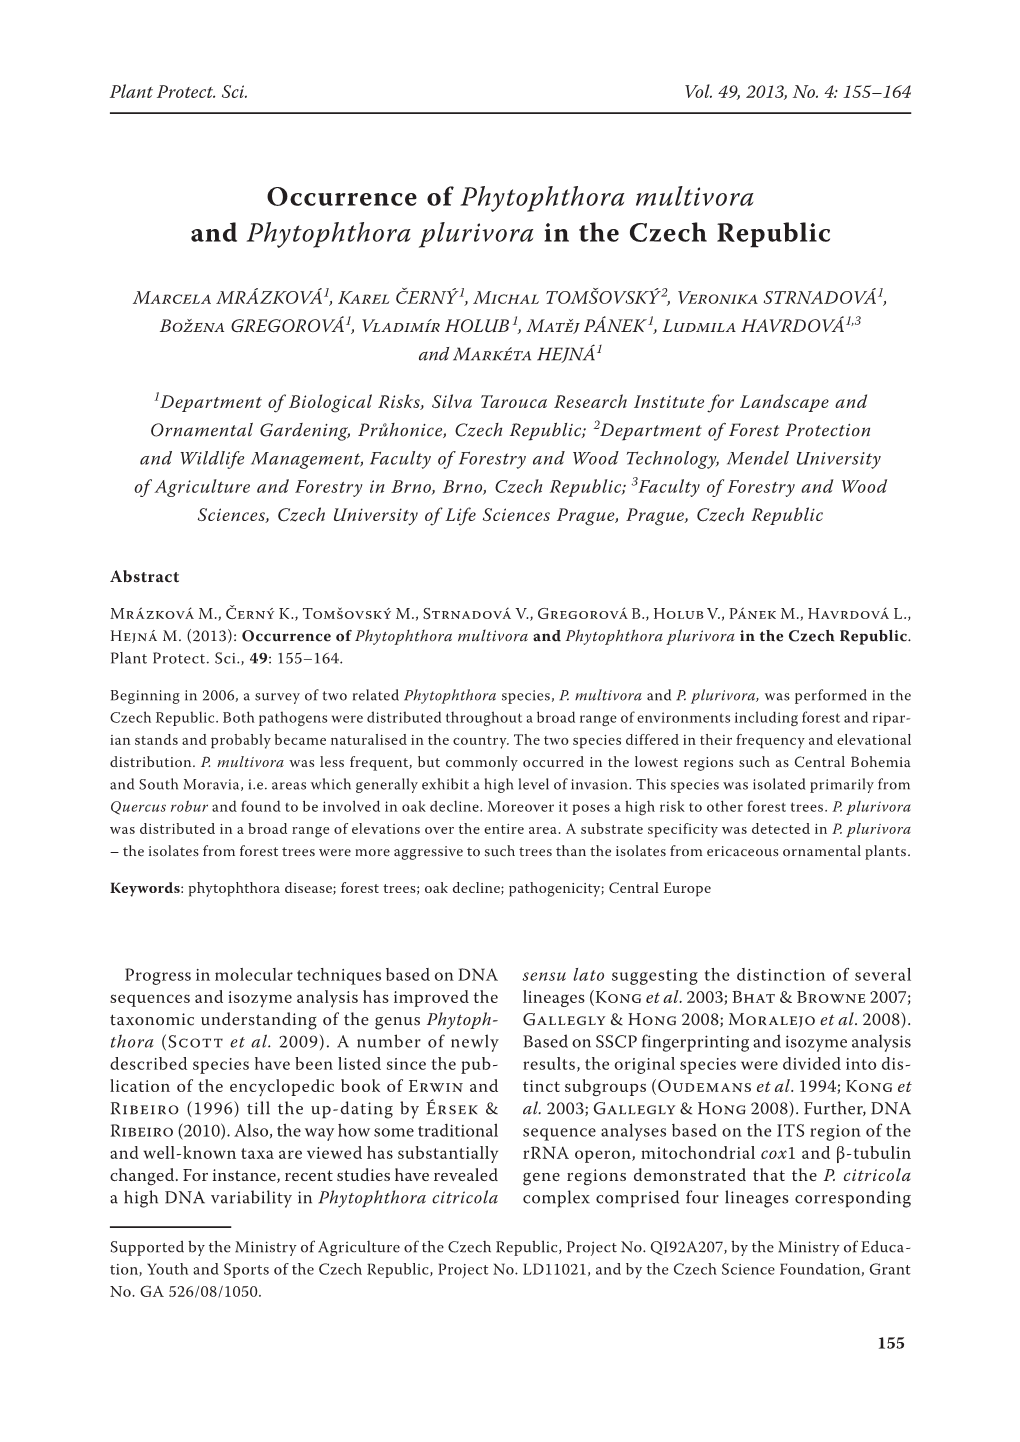 Occurrence of Phytophthora Multivora and Phytophthora Plurivora in the Czech Republic